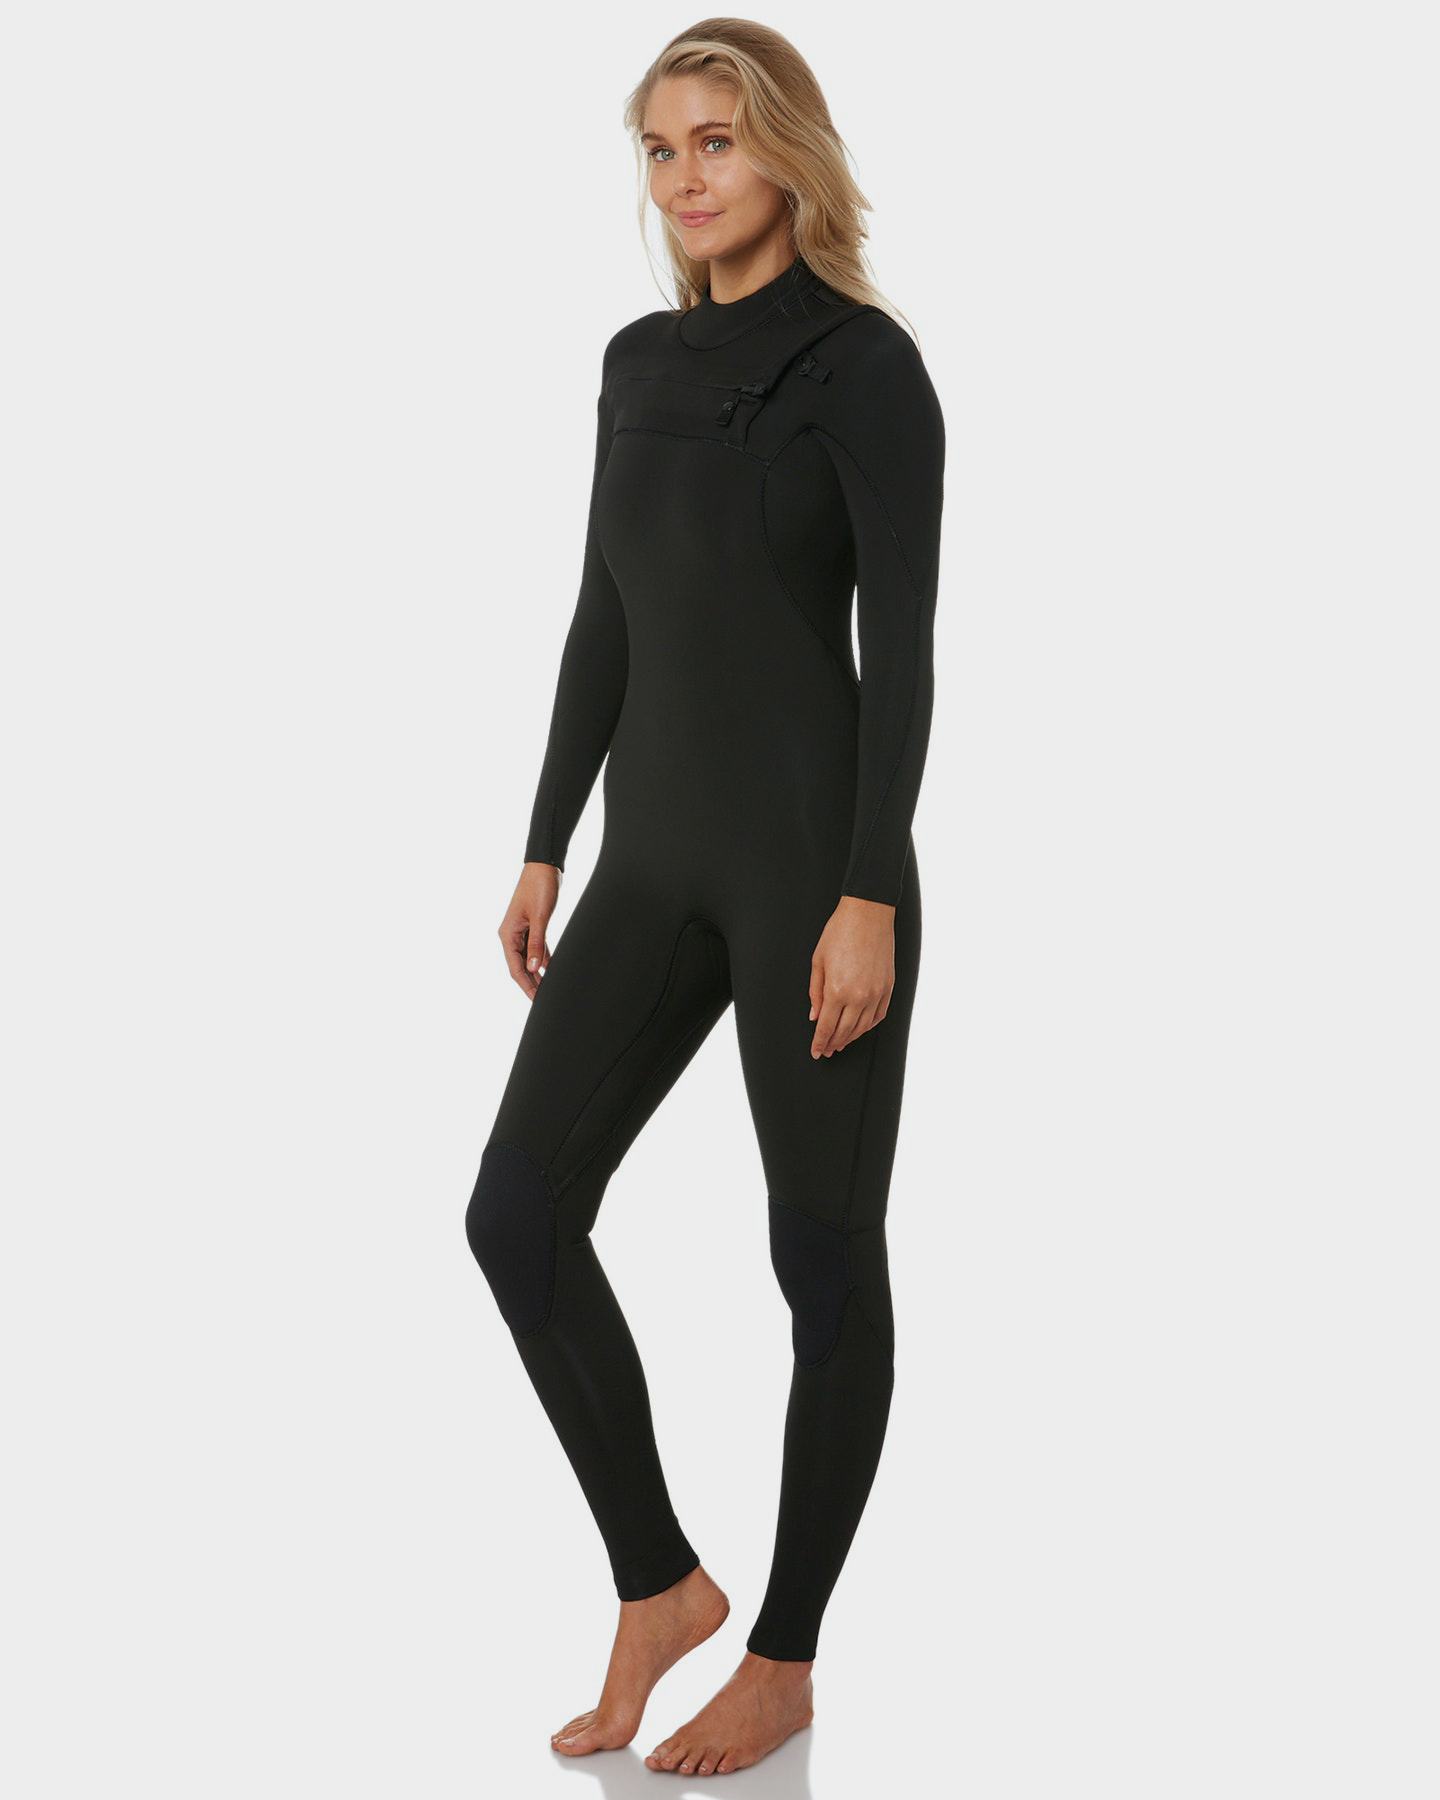 Project Blank Womens 3/2Mm Eco Ultimate Wetsuit - Black | SurfStitch